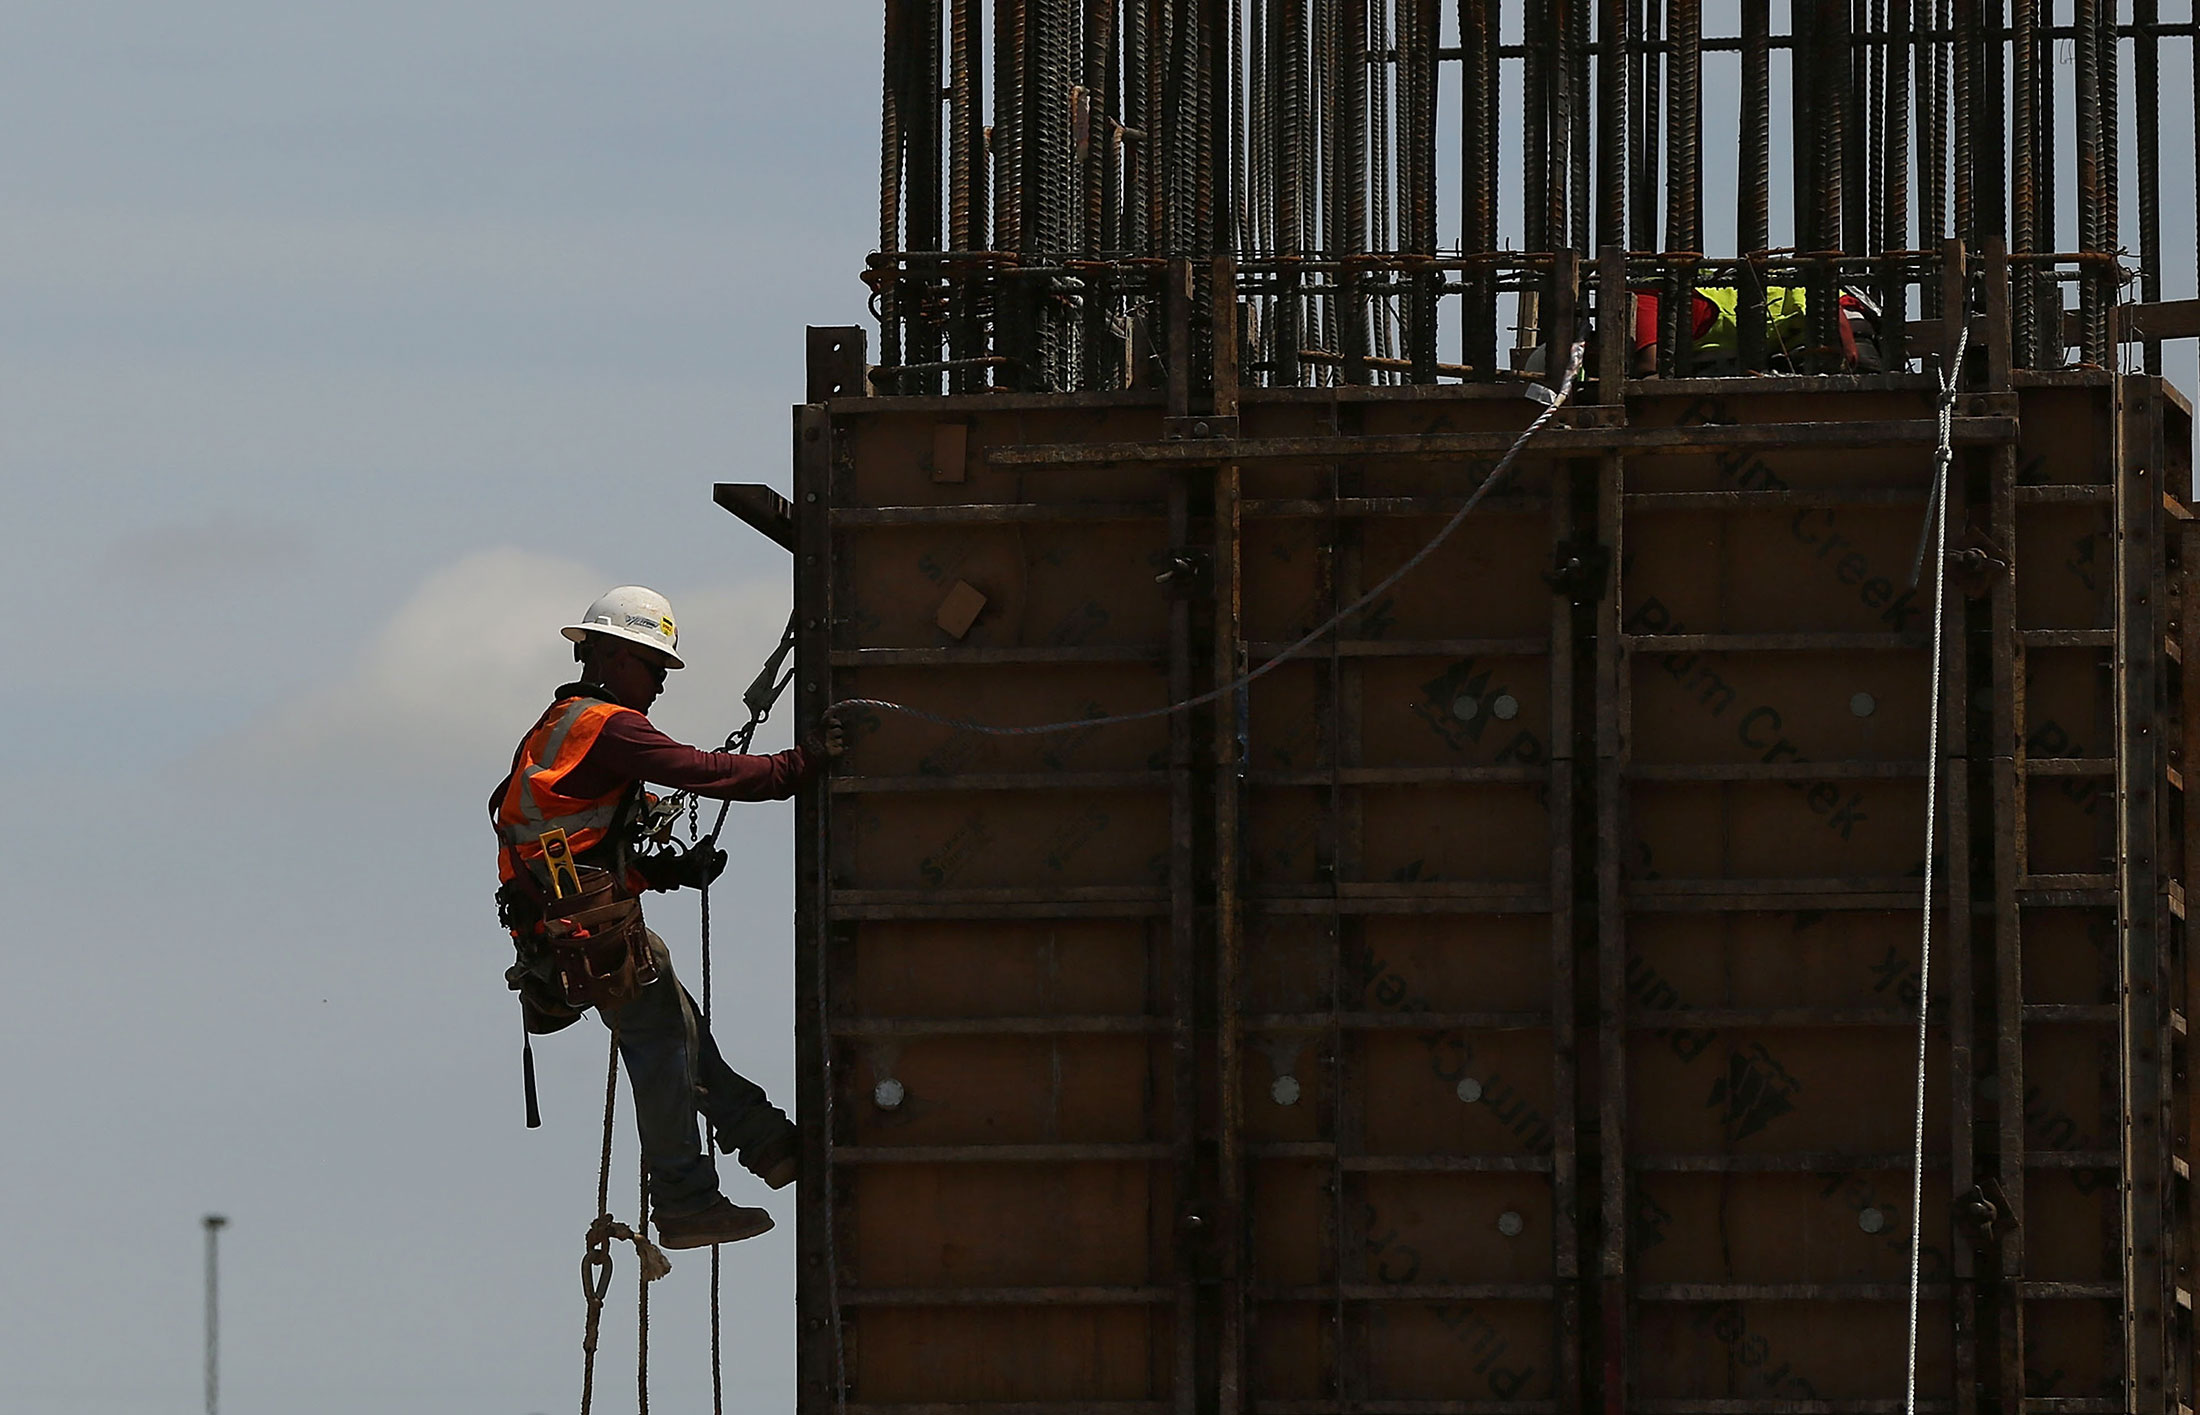 Construction workers on a job site on March 25, 2015 in Houston, Texas.
